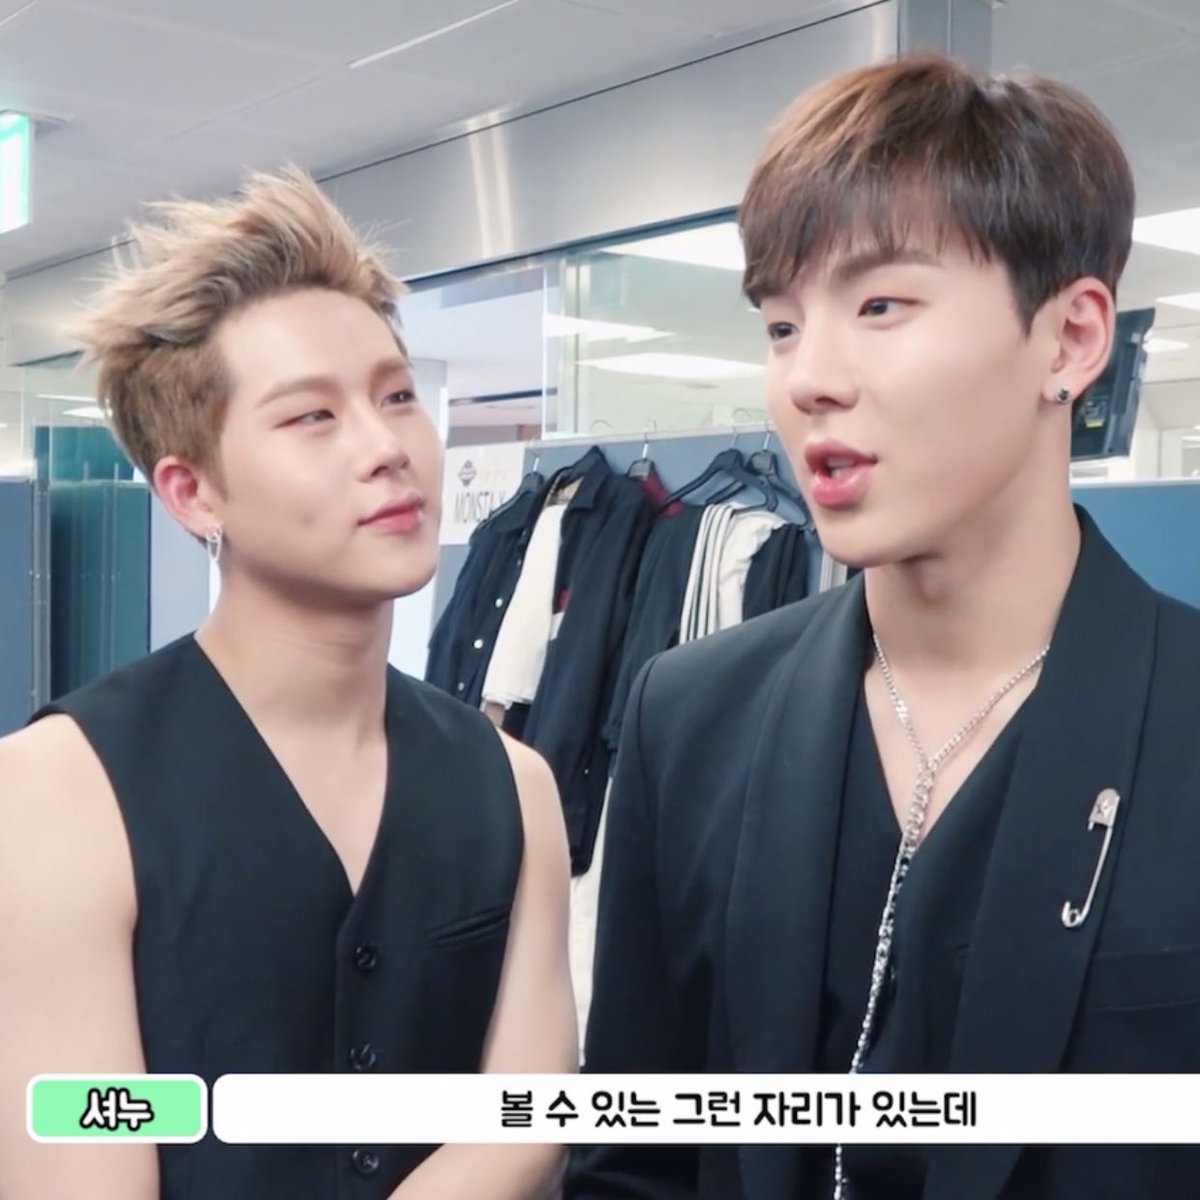 showheon - jooheon is shownu’s number 1 fan- they always support eachother - father&son energy - ‘when jooheon is on stage there is a lot to learn from him as a performer’